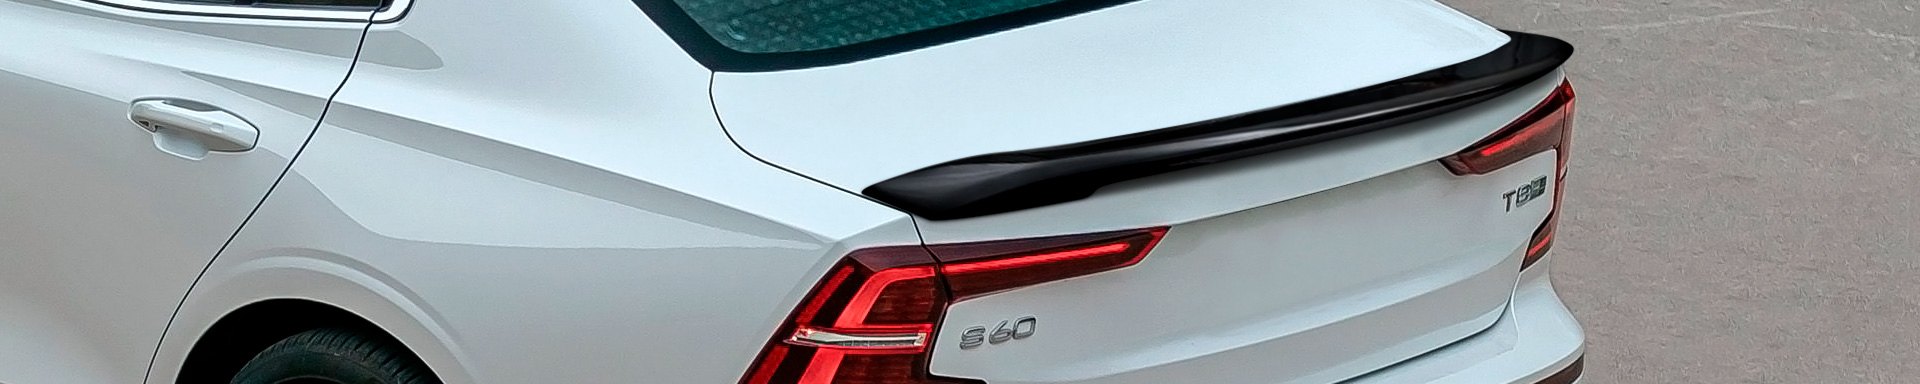 Improve The Aesthetics Of Your S60 With All-New Spoiler By T5i